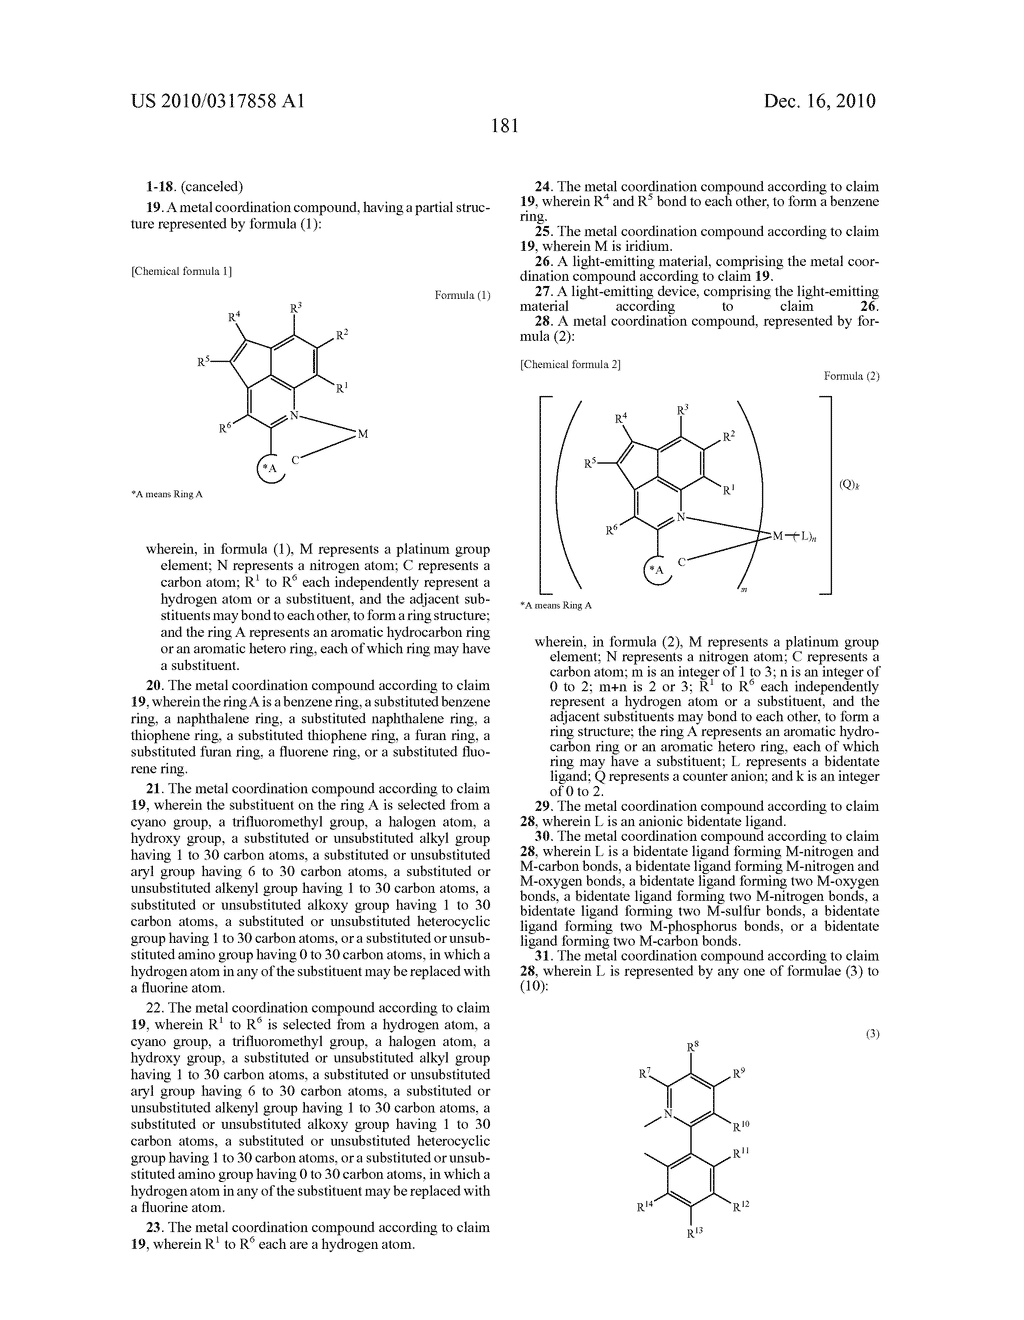 METAL COORDINATION COMPOUND AND LIGHT-EMITTING MATERIAL CONTAINING THE SAME - diagram, schematic, and image 188